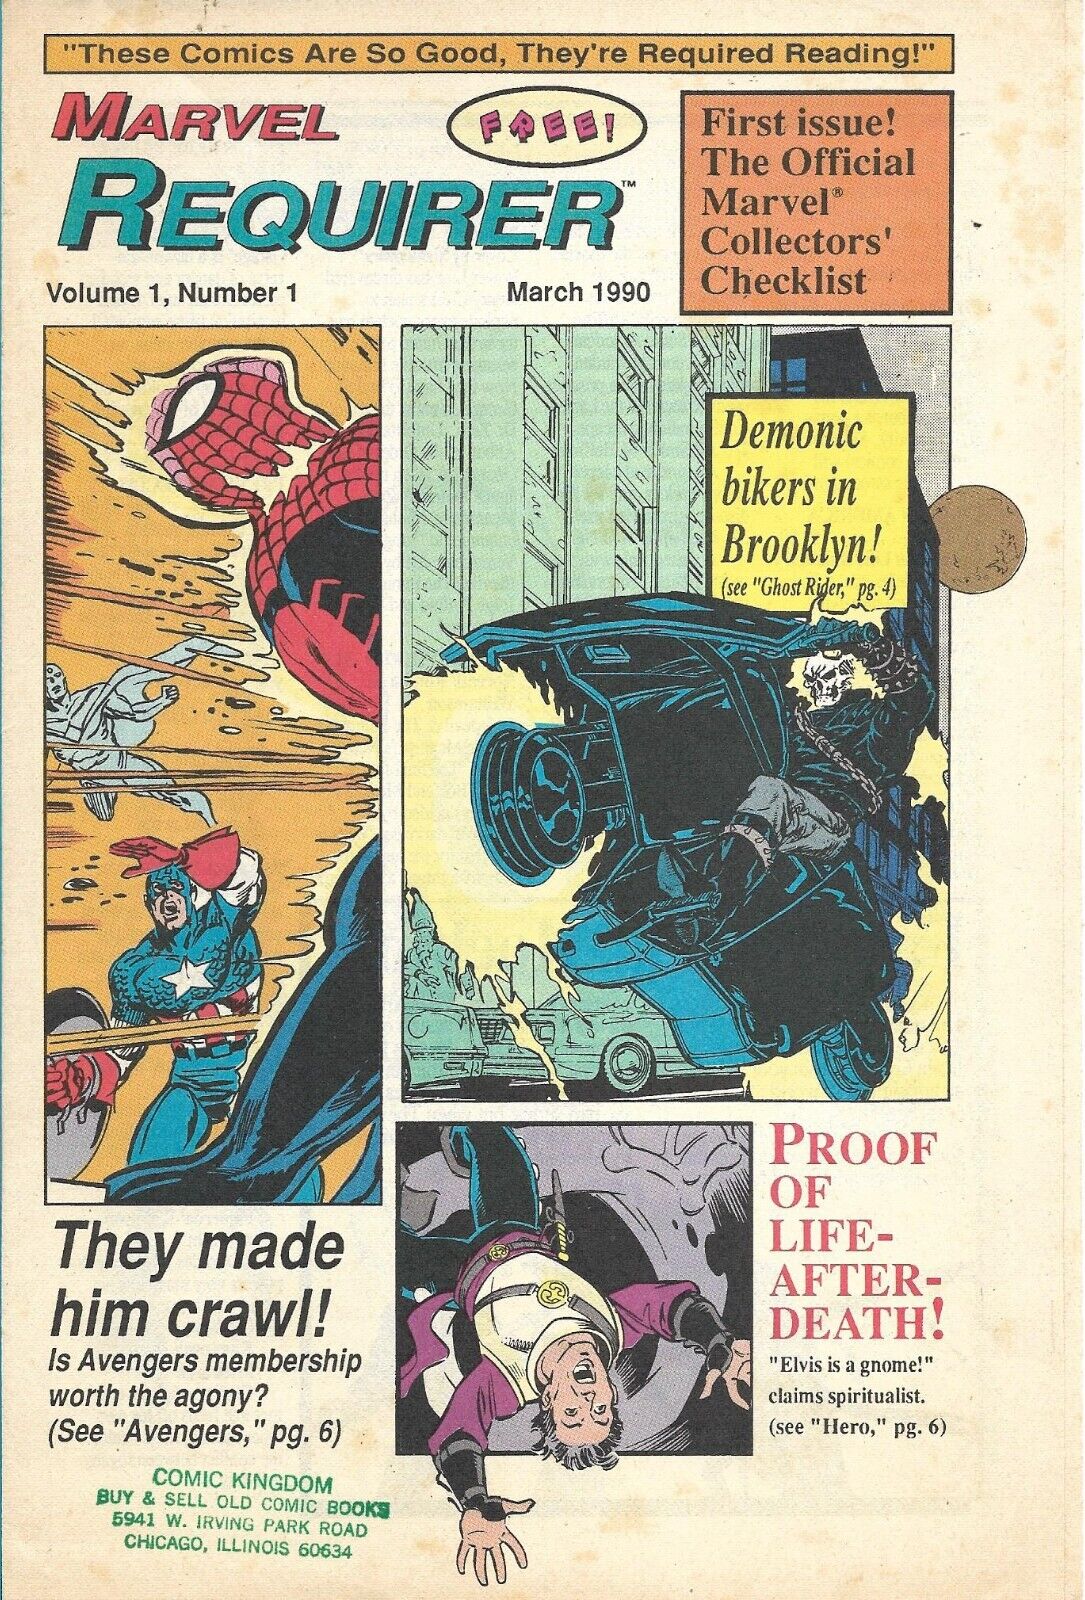 Marvel Requirer#1 March 1990